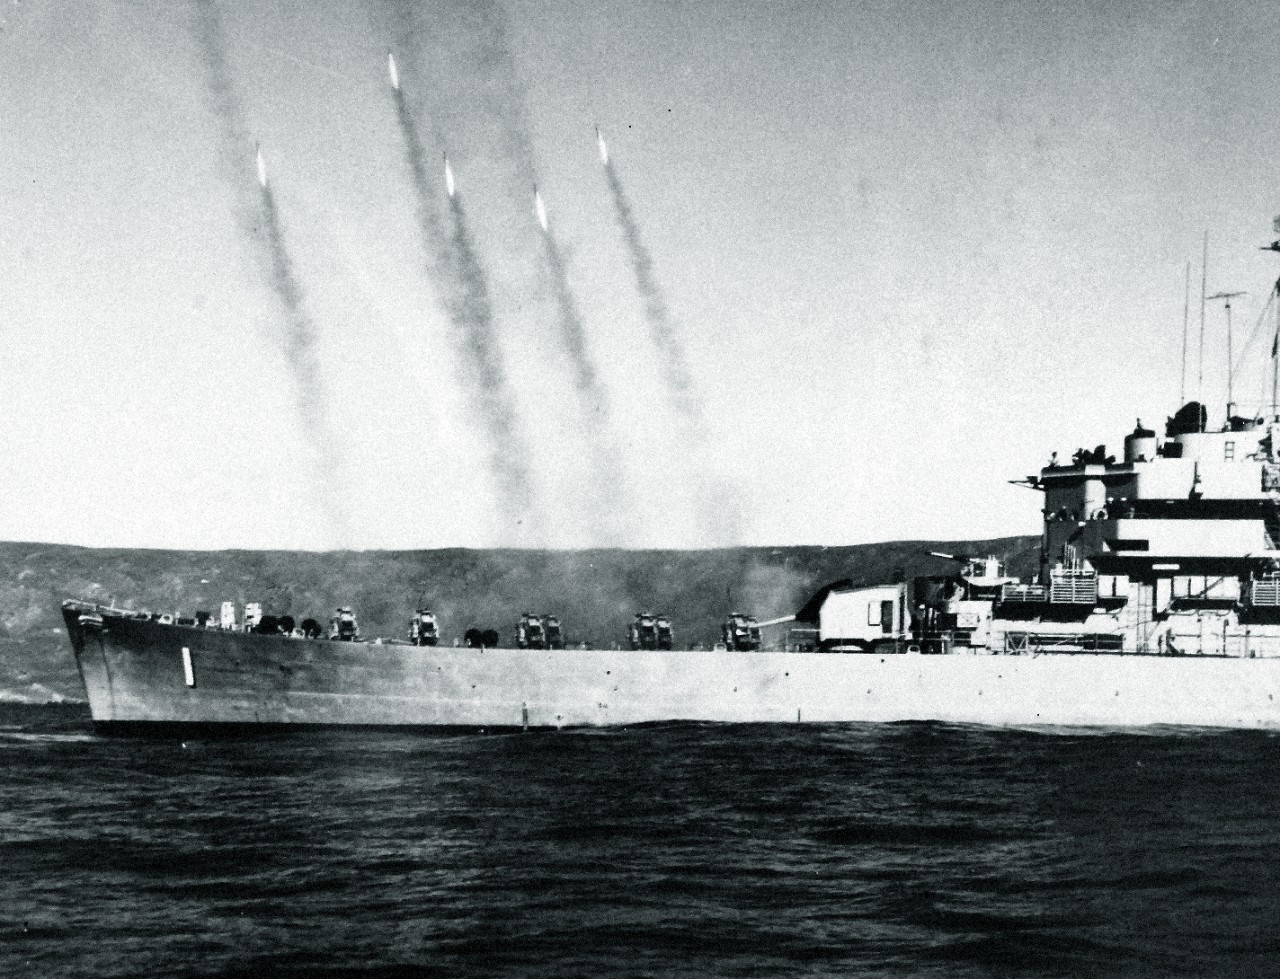 330-PS-7833:   USS Carronade (IFS-1), 1956.    Carronade fires a salvo of rockets during a recent amphibious training operation off the coast of Kauai, Hawaii.  The Carronade, a new type of navy ship, was designed to replace the LSMR (Medium Landing Ship, Rocket), which was employed during World War II to give close-in fire support to troops ashore.  The latest improvements in shipboard habitability have been incorporated in the design of the vessel.   Photograph released May 4, 1956.   Official DOD Photograph, now in the collections of the National Archives.  Also at the National Archives as USN 709597. (2015/02/25).  